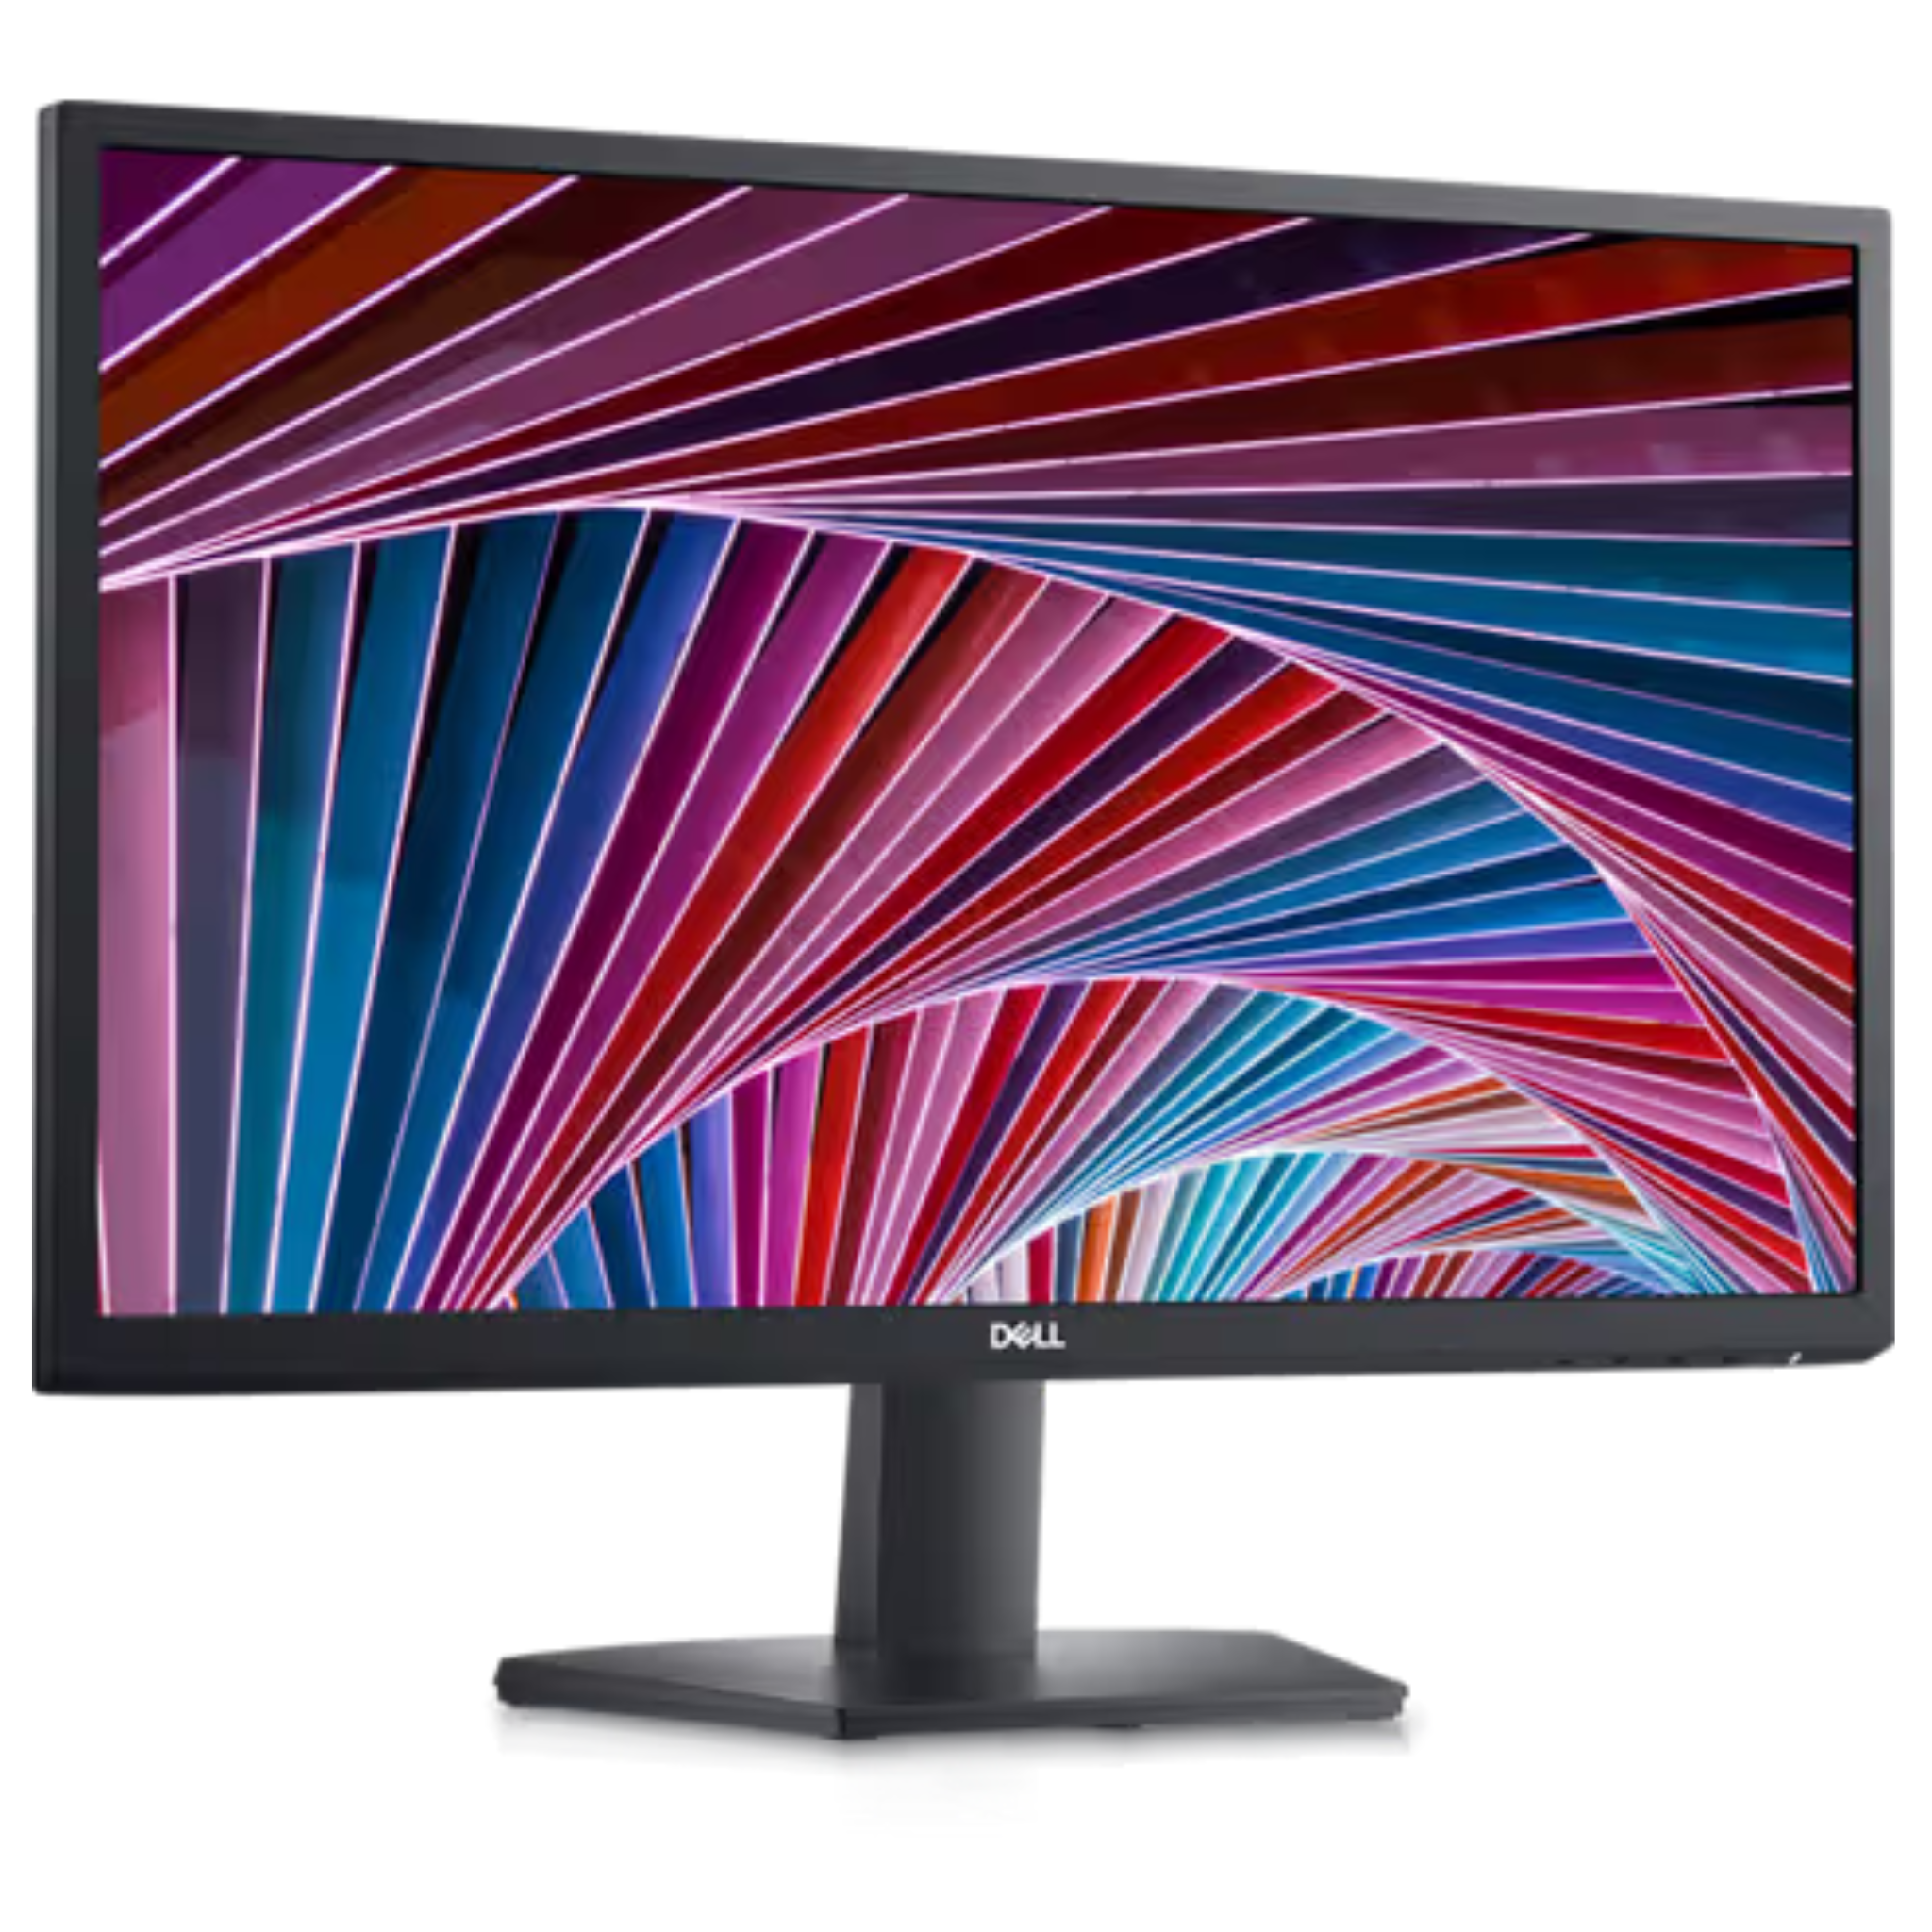 Dell 24″ SE2422H Monitor With Built-In Speakers